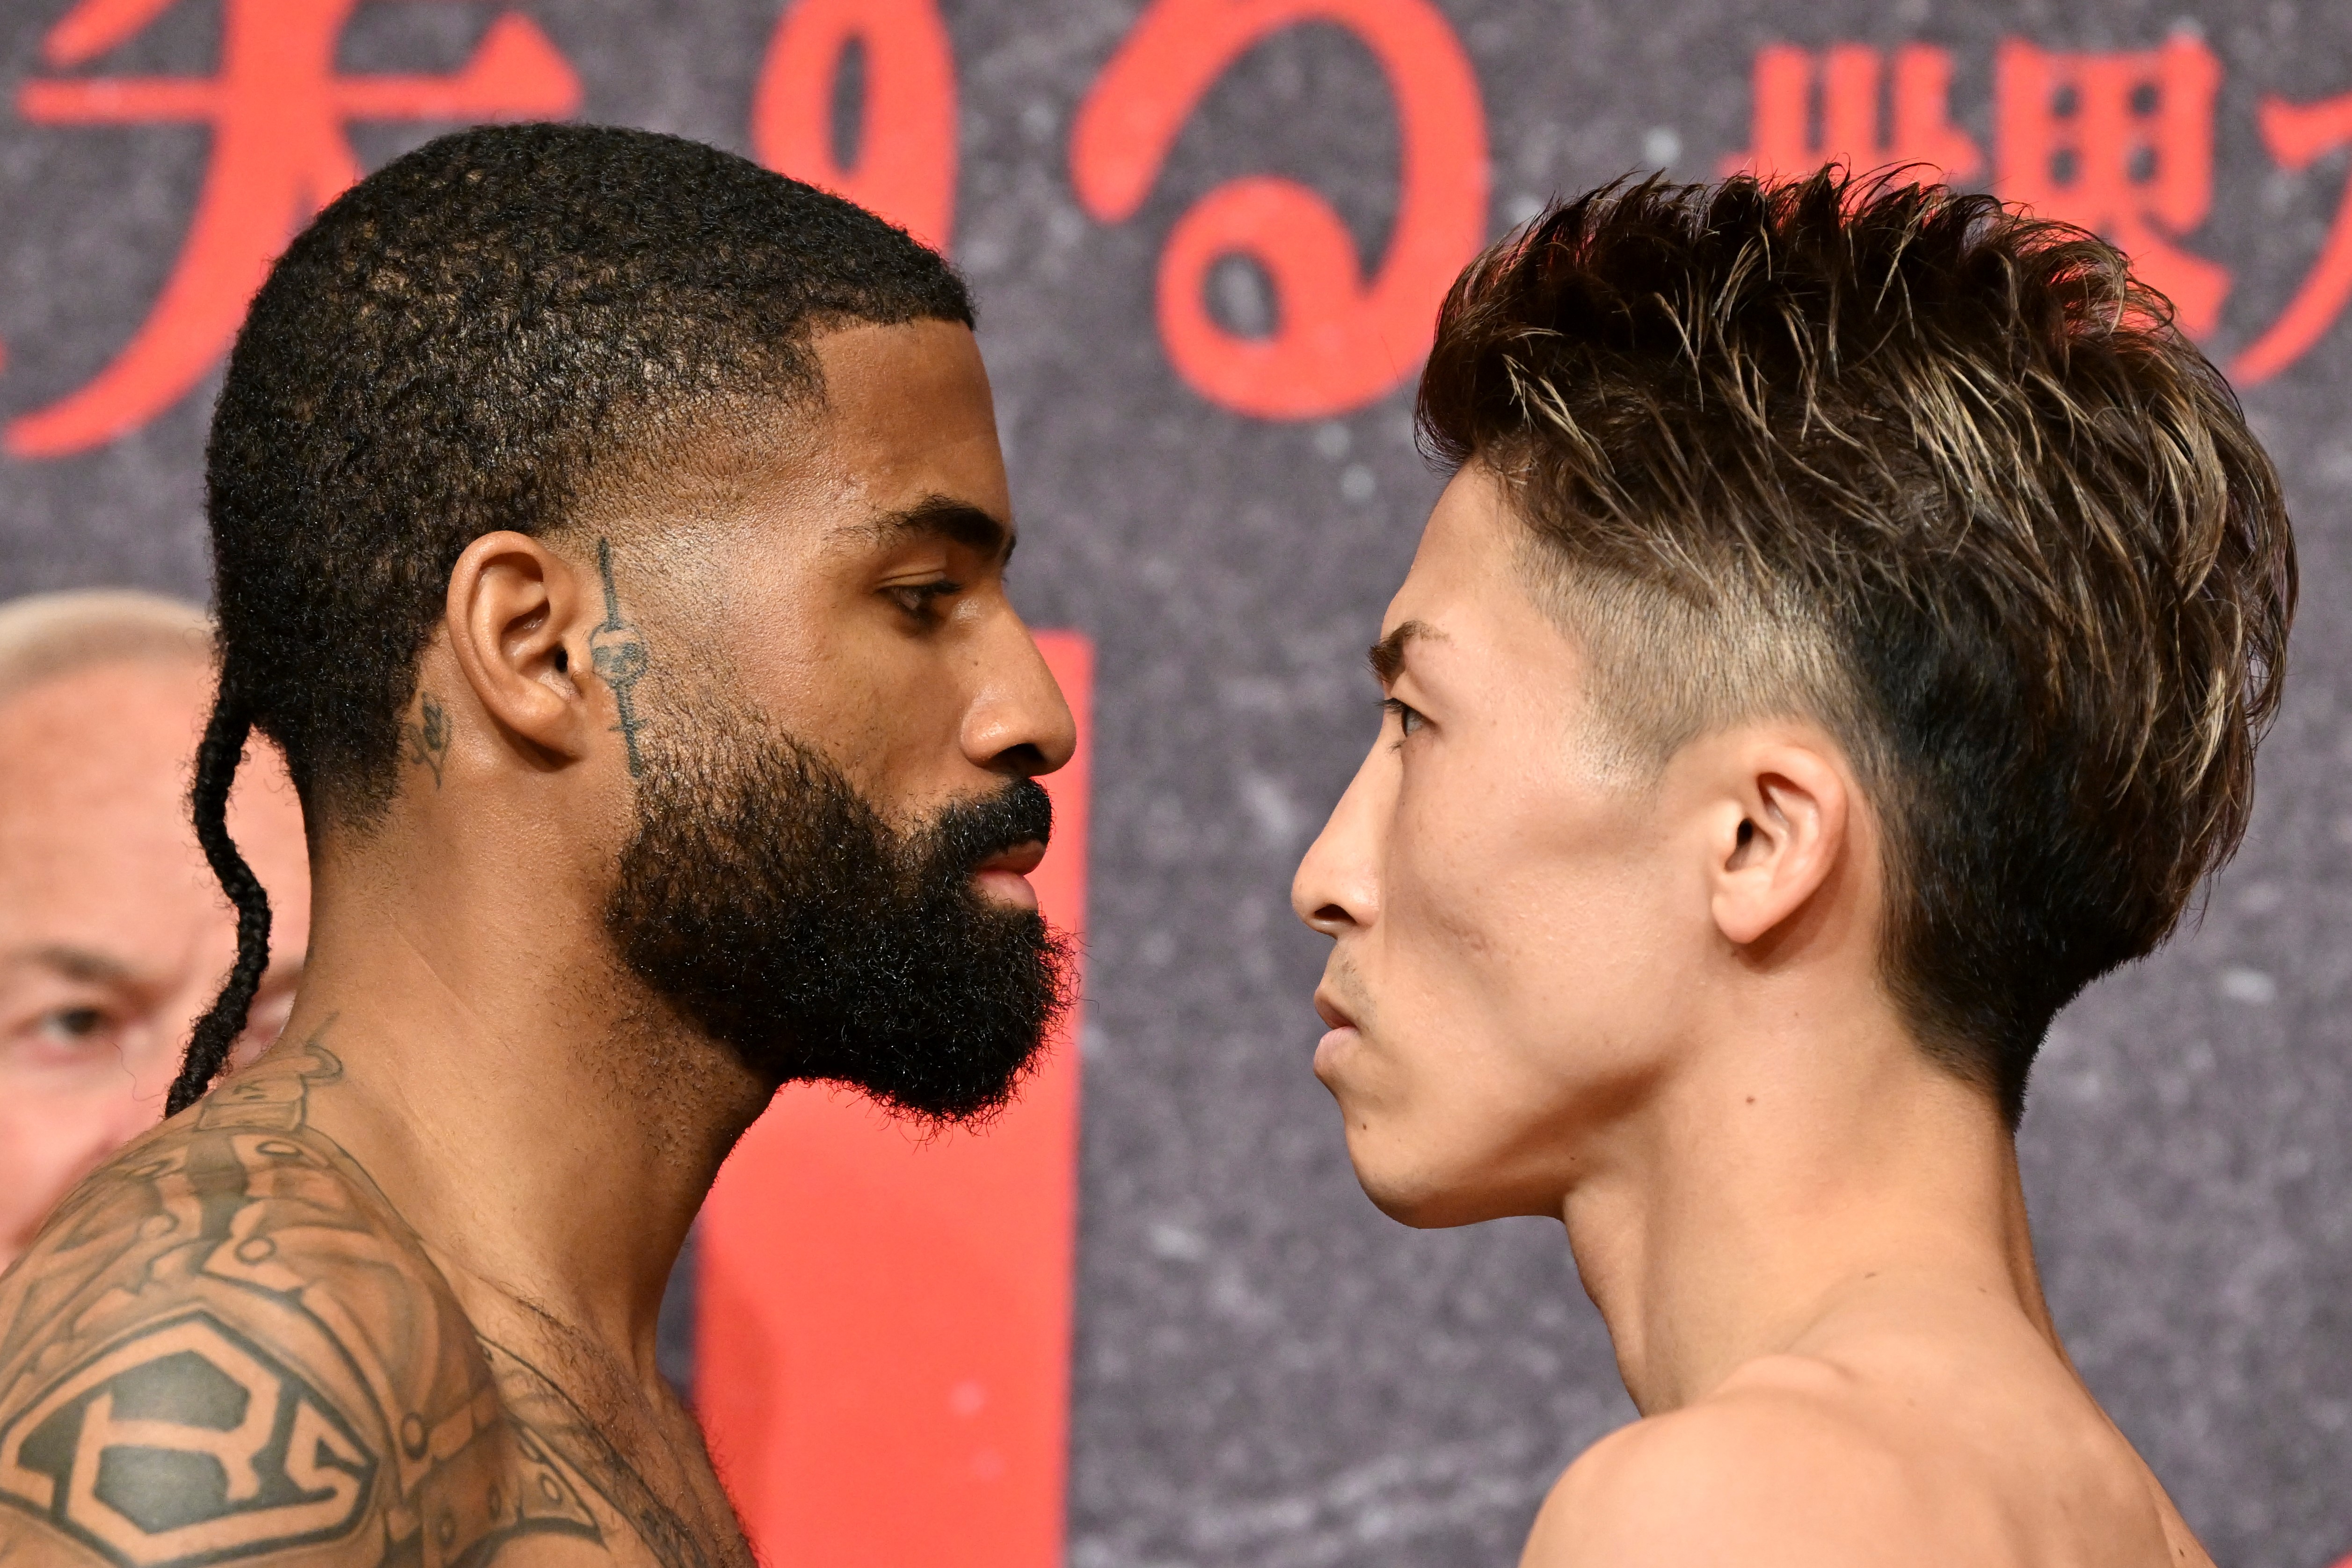 Fulton vs Inoue: Live streaming results, RBR, how to watch, start